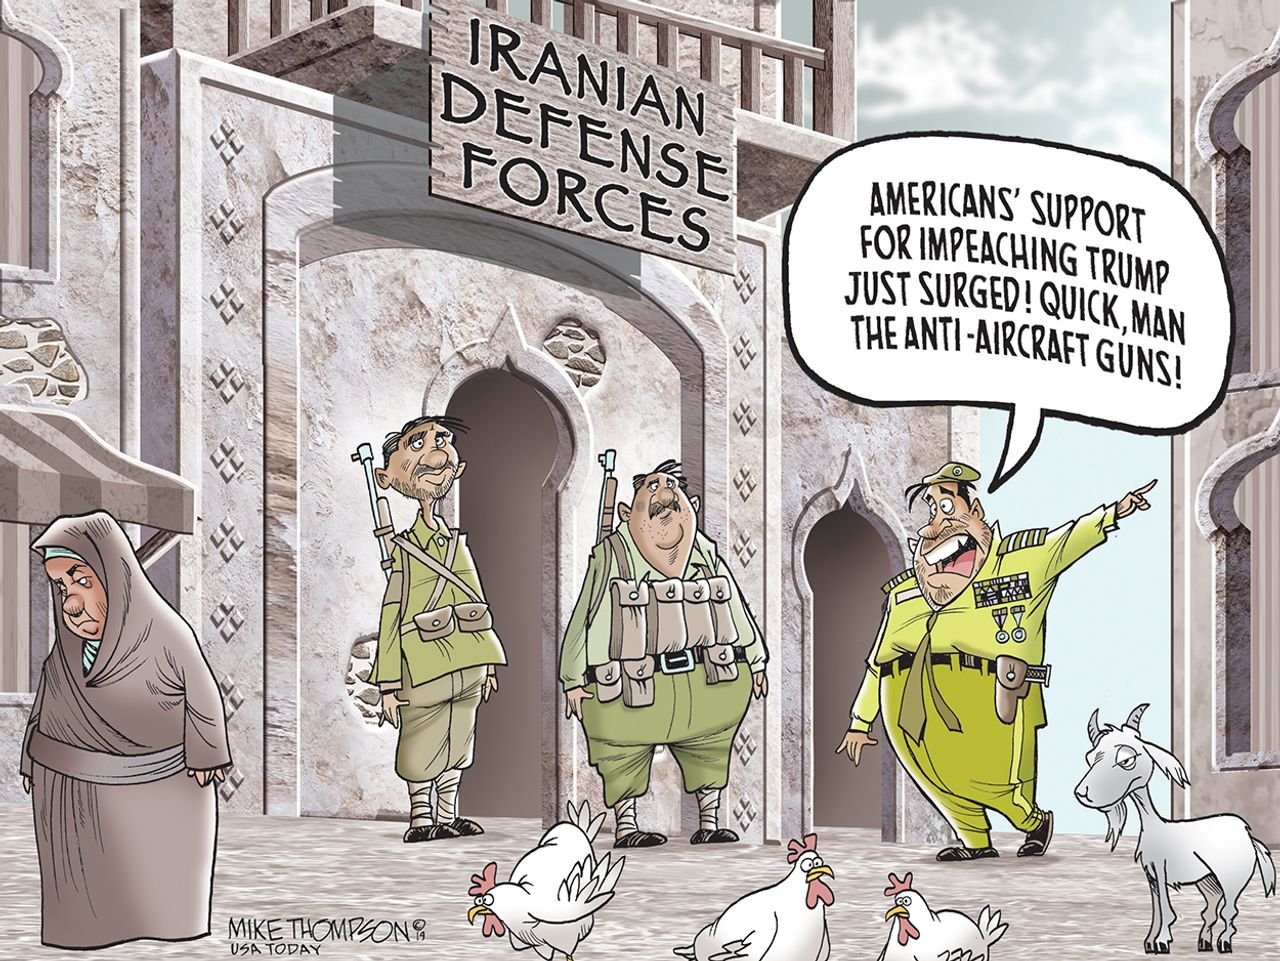 cartoon - | Iranian Idefense | Forces Americans' Support For Impeaching Trump Just Surged! Quick. Man The AntiAircraft Guns! Kor Mike Thomson Usa Today no an